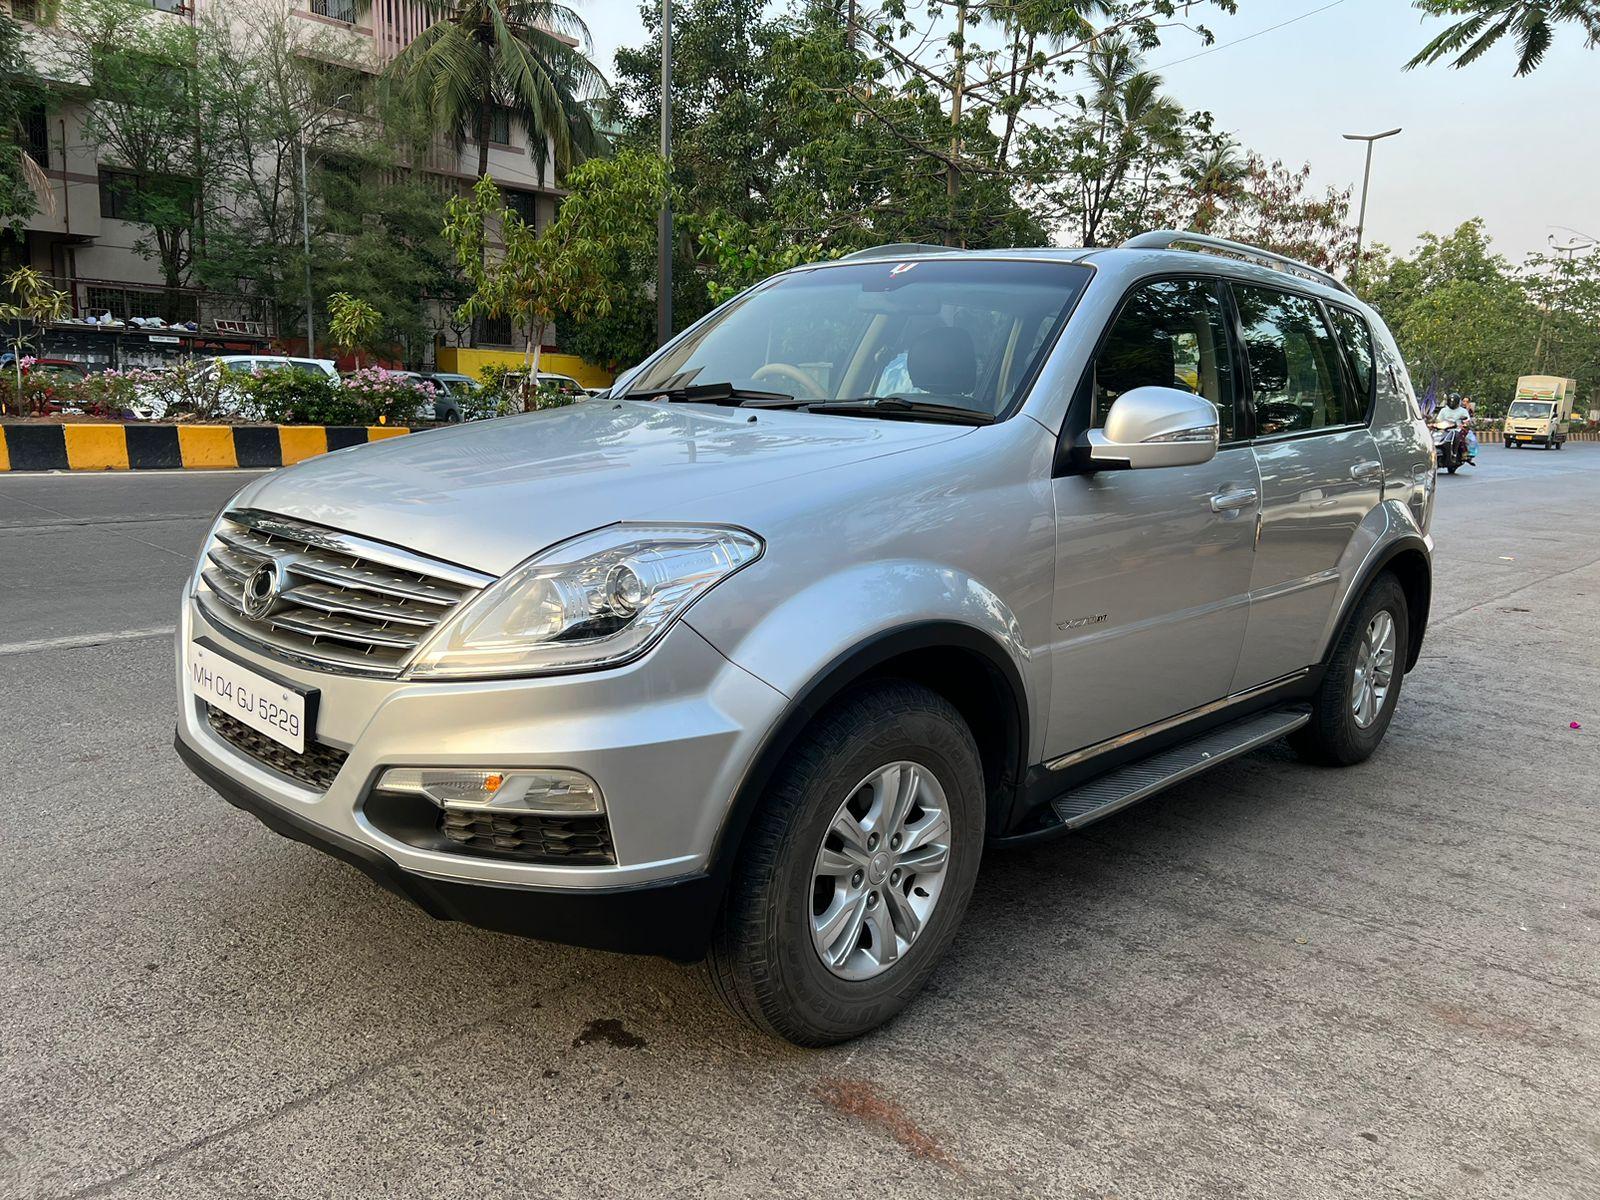 Used 2013 SsangYong Rexton W RX7 for sale